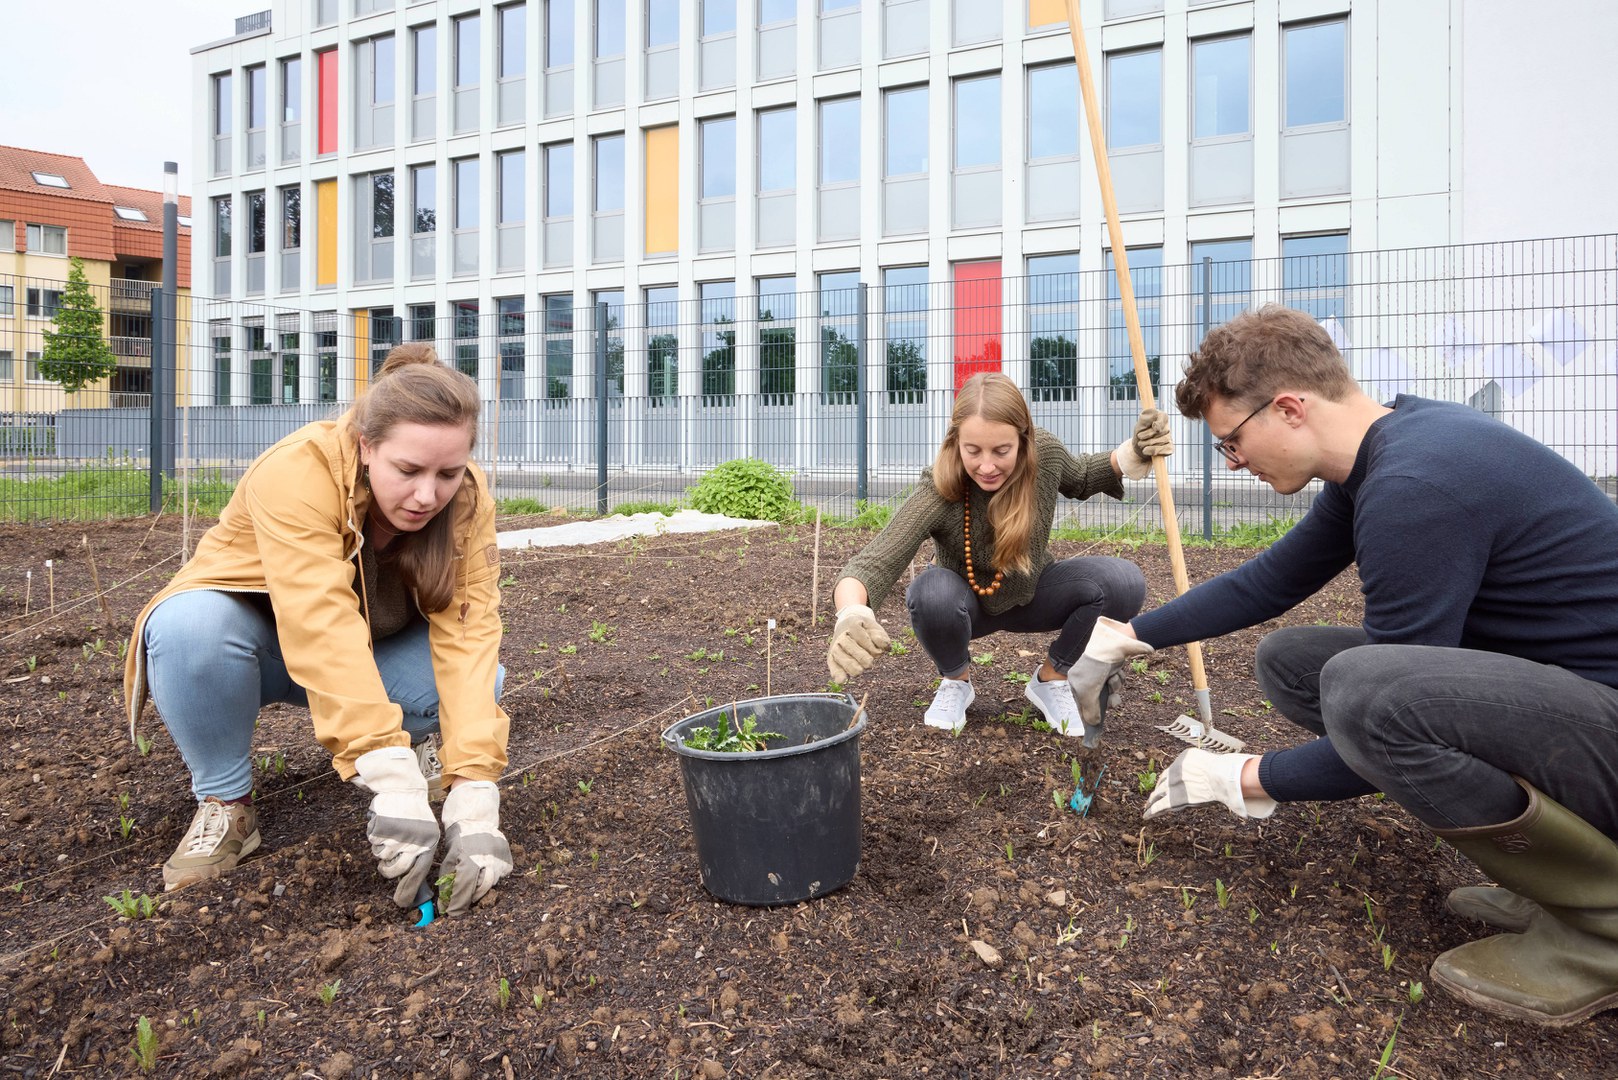 The CampusAckerdemie project prepares trainee teachers for teaching in-school gardening classes later on in their careers